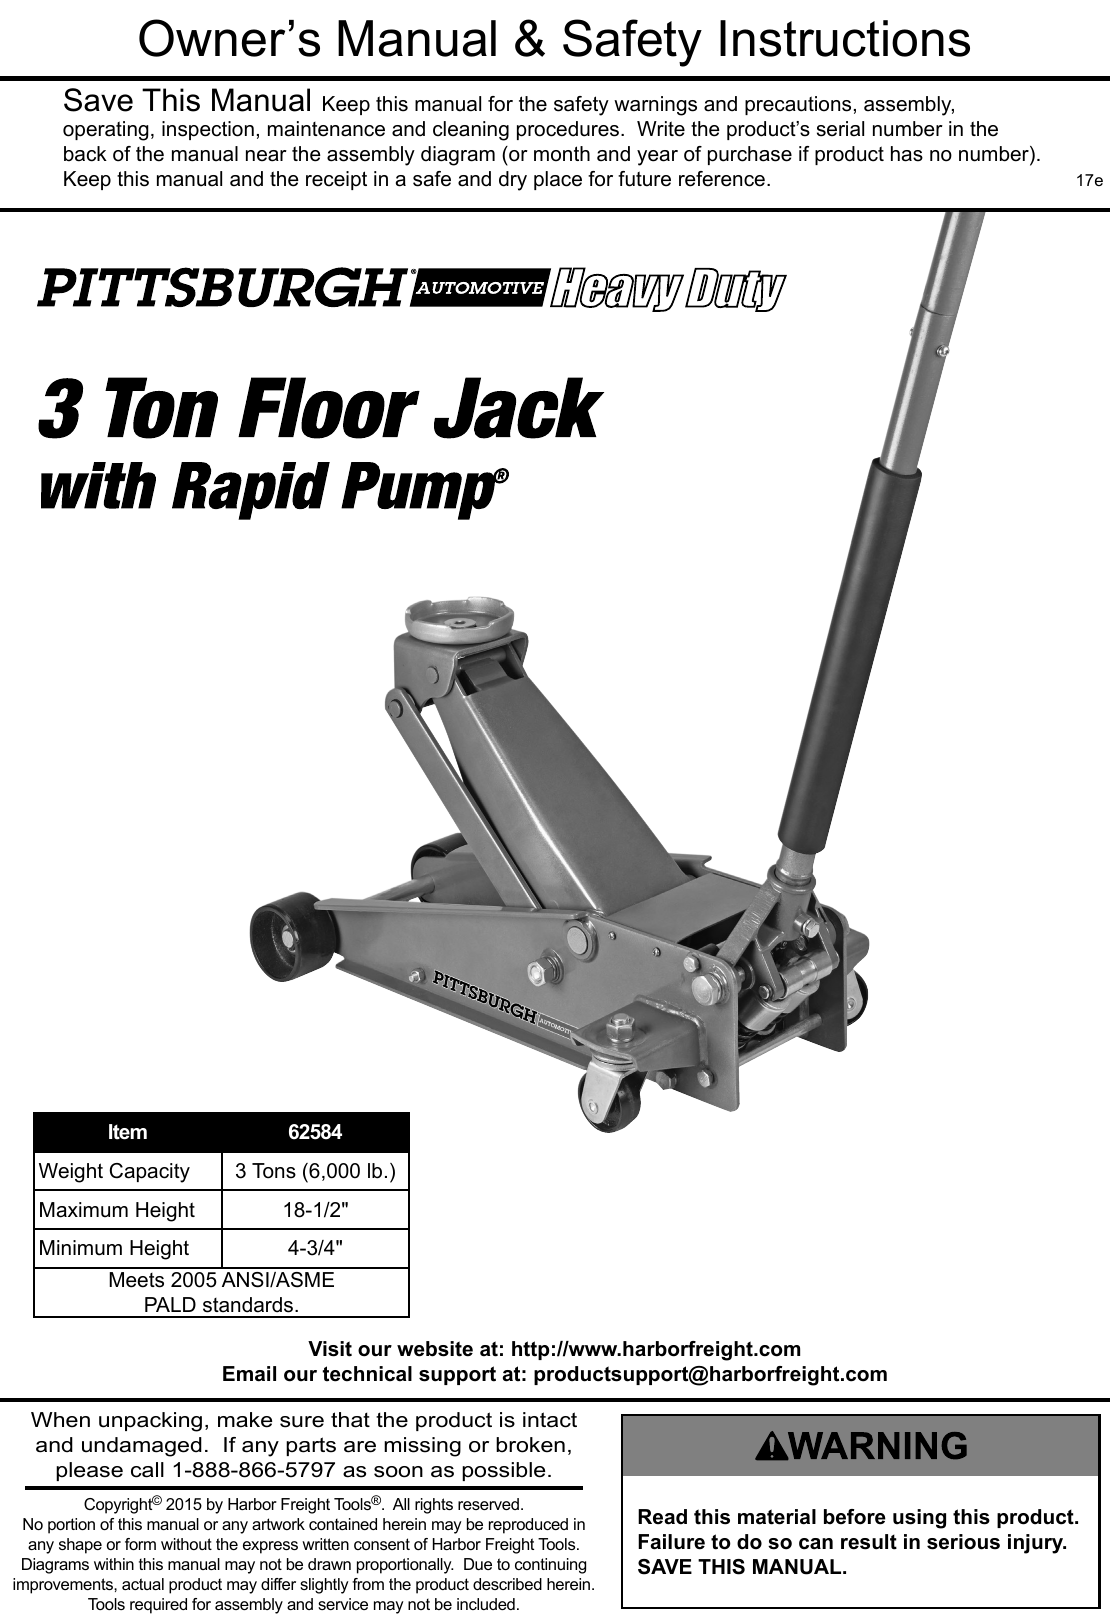 Manual For The 62584 3 Ton Steel Heavy Duty Floor Jack With Rapid Pump